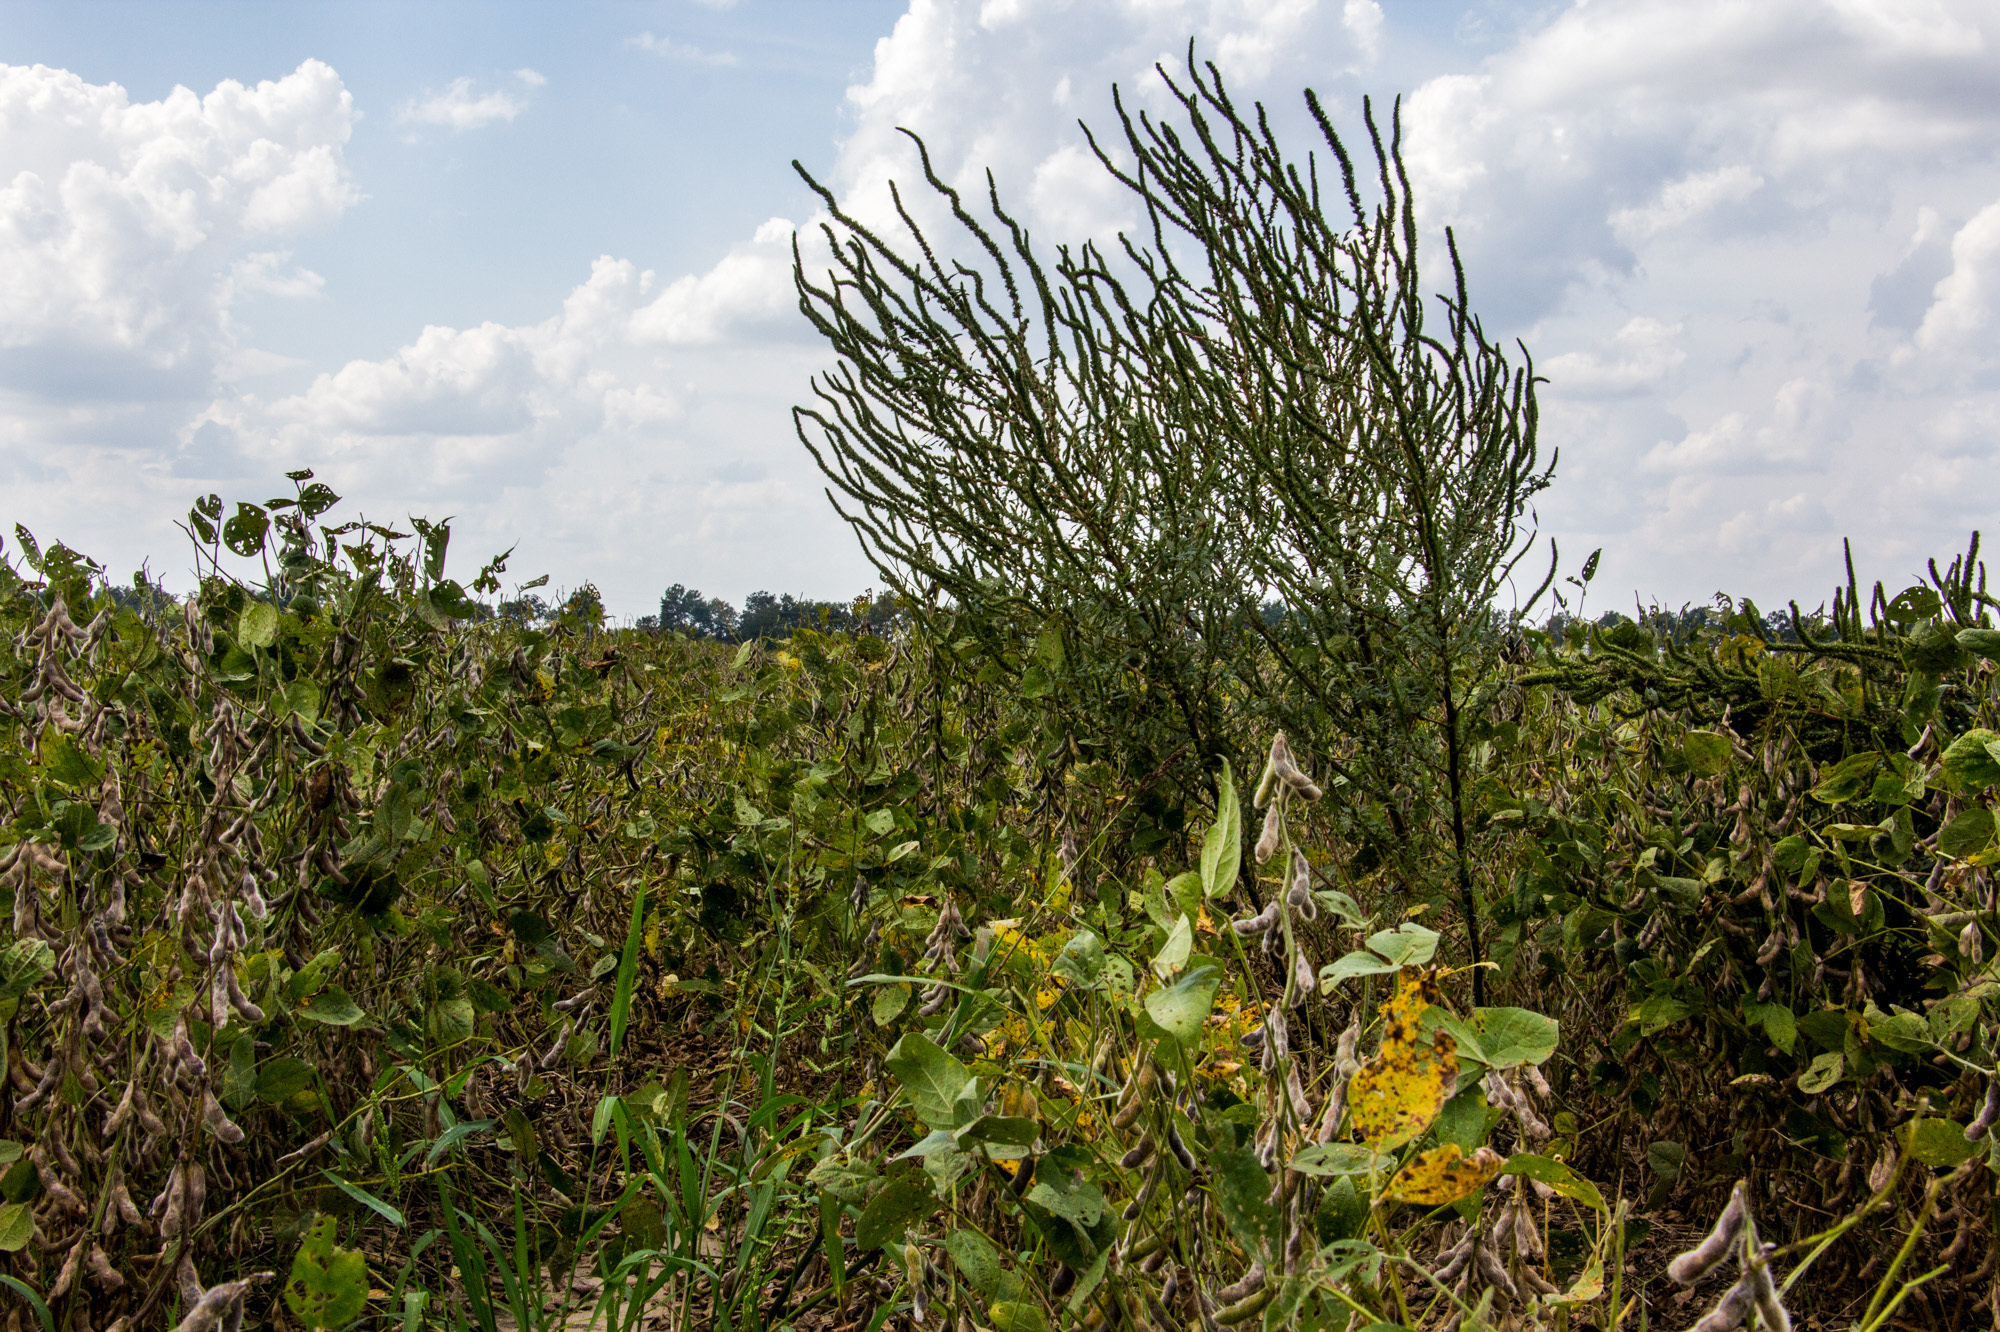 A farmer's nightmare weed, glyphosate-resistant Palmer amaranth, or pigweed, sprouts in a soybean field in Arkansas. Its evolution has farmers looking for new weedkilling strategies.